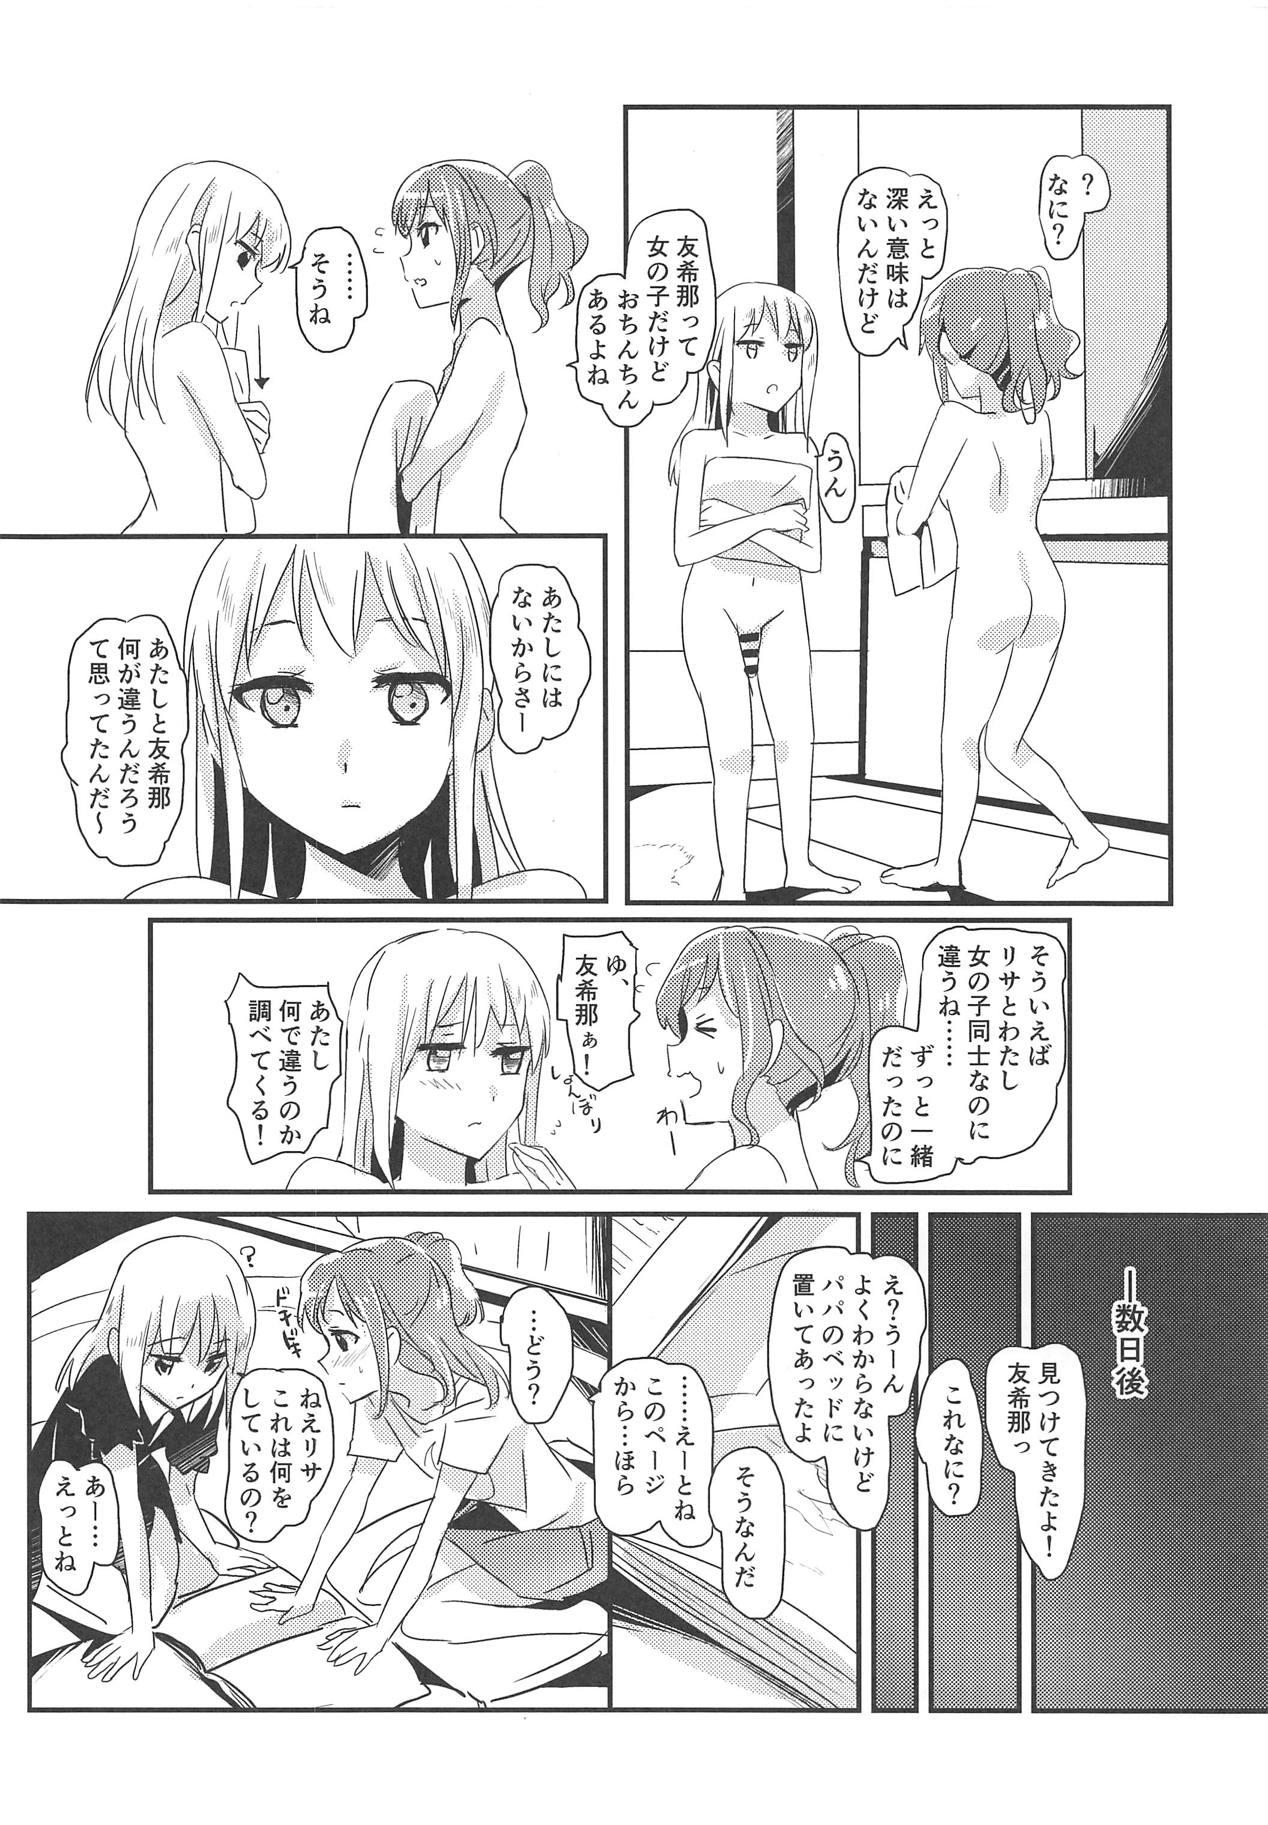 Old And Young Serenade - Bang dream Bubblebutt - Page 3